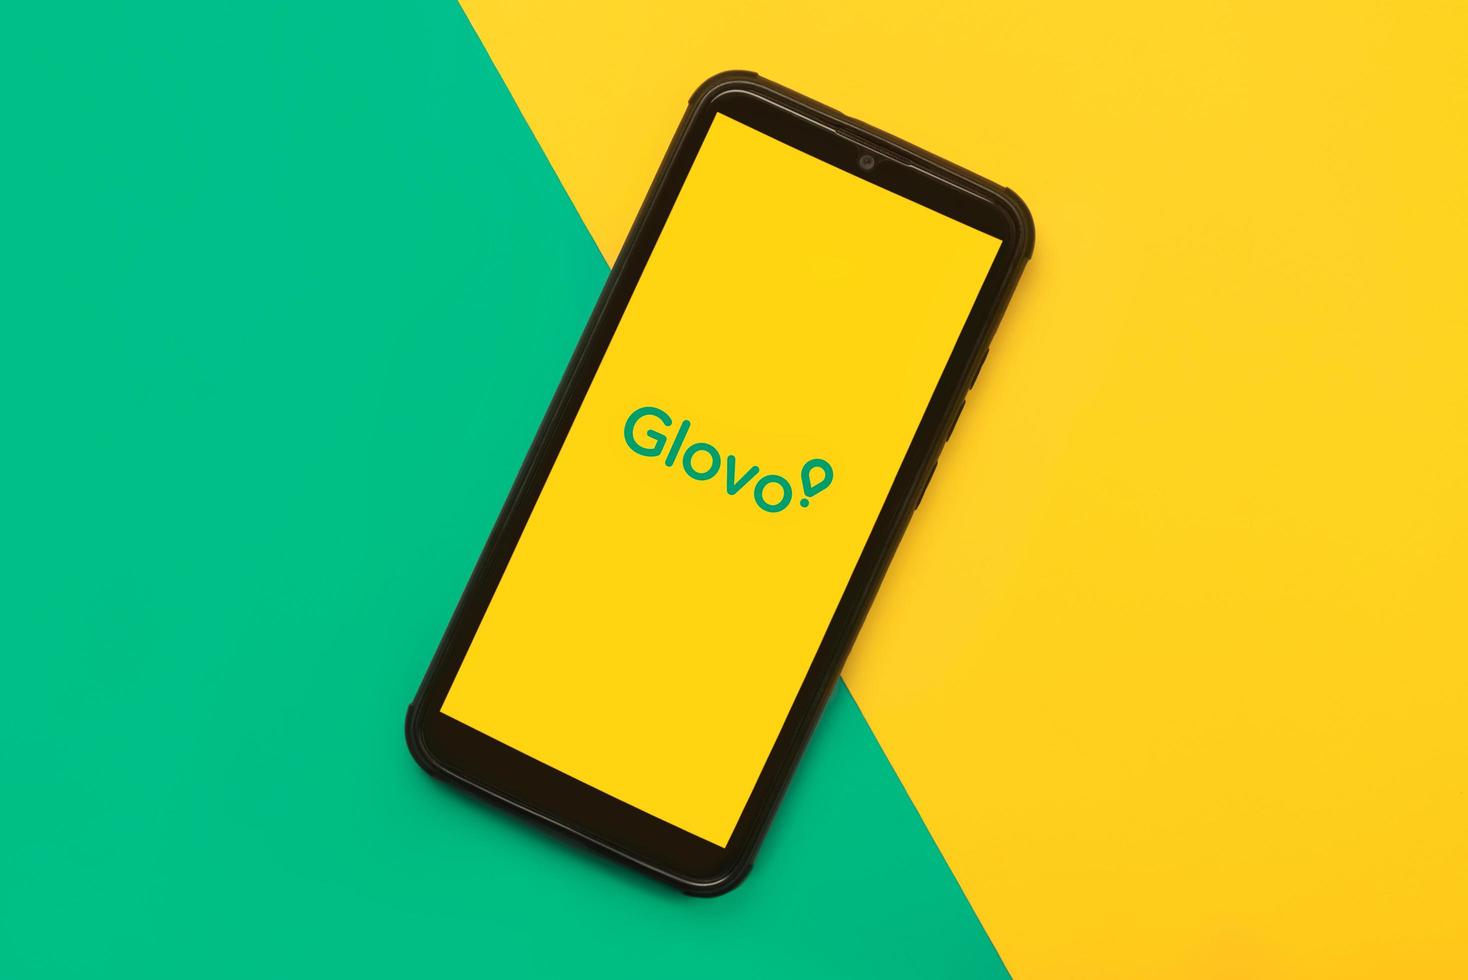 Glovo application icon on black screen of smartphone. Food delivery app photo